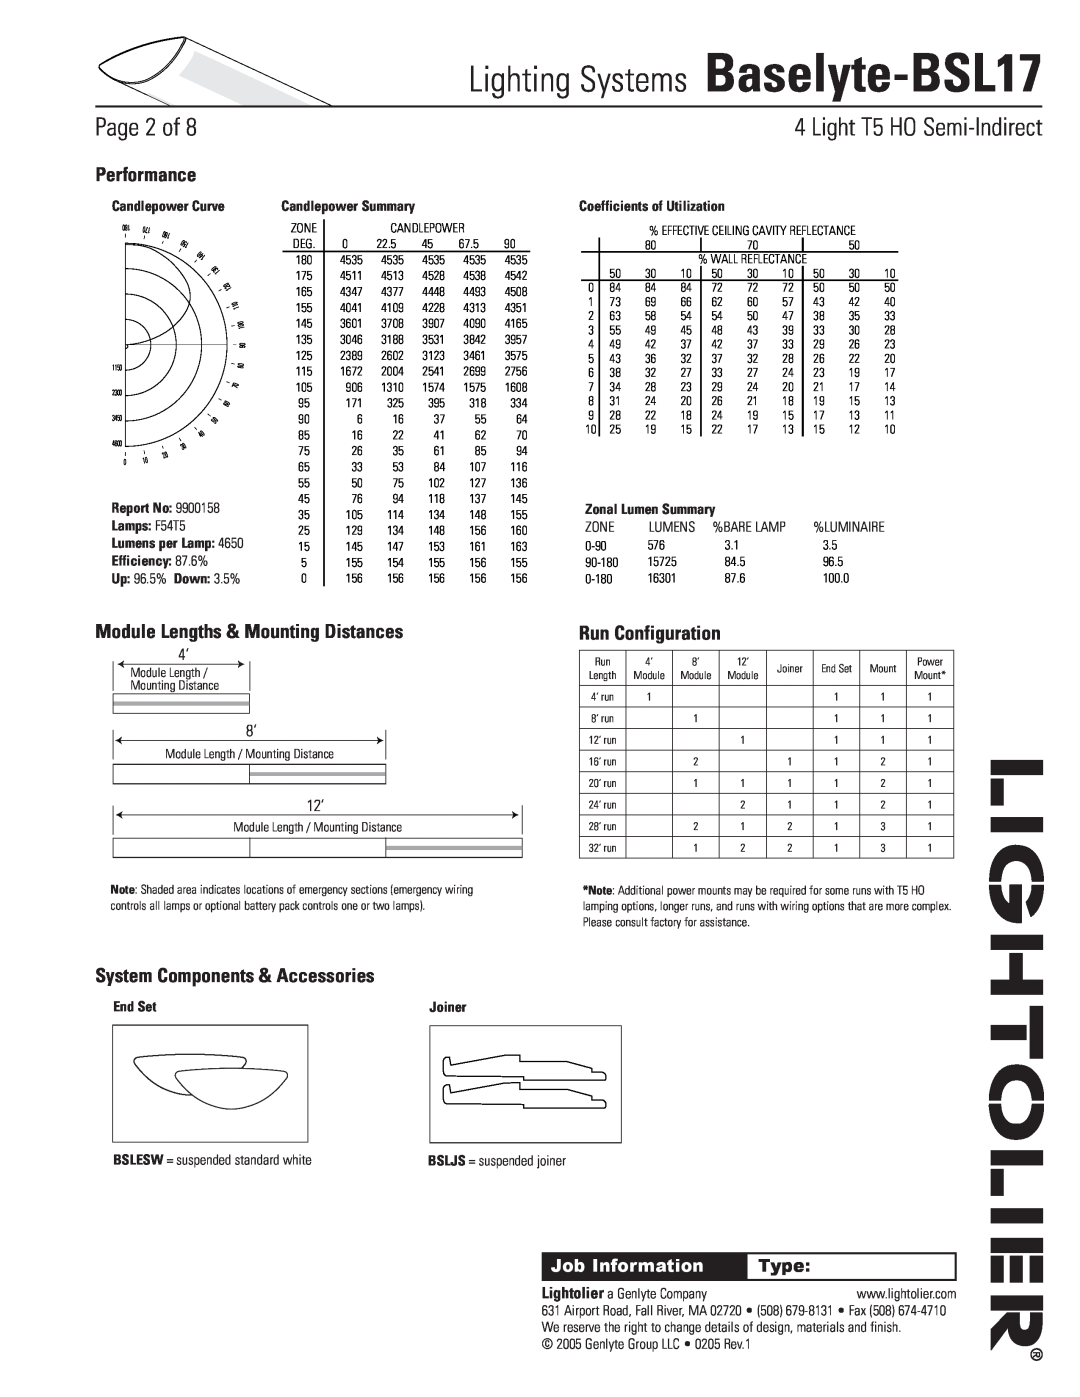 Lightolier Lighting Systems Baselyte-BSL17, Module Lengths & Mounting Distances, Run Configuration, Type, Performance 